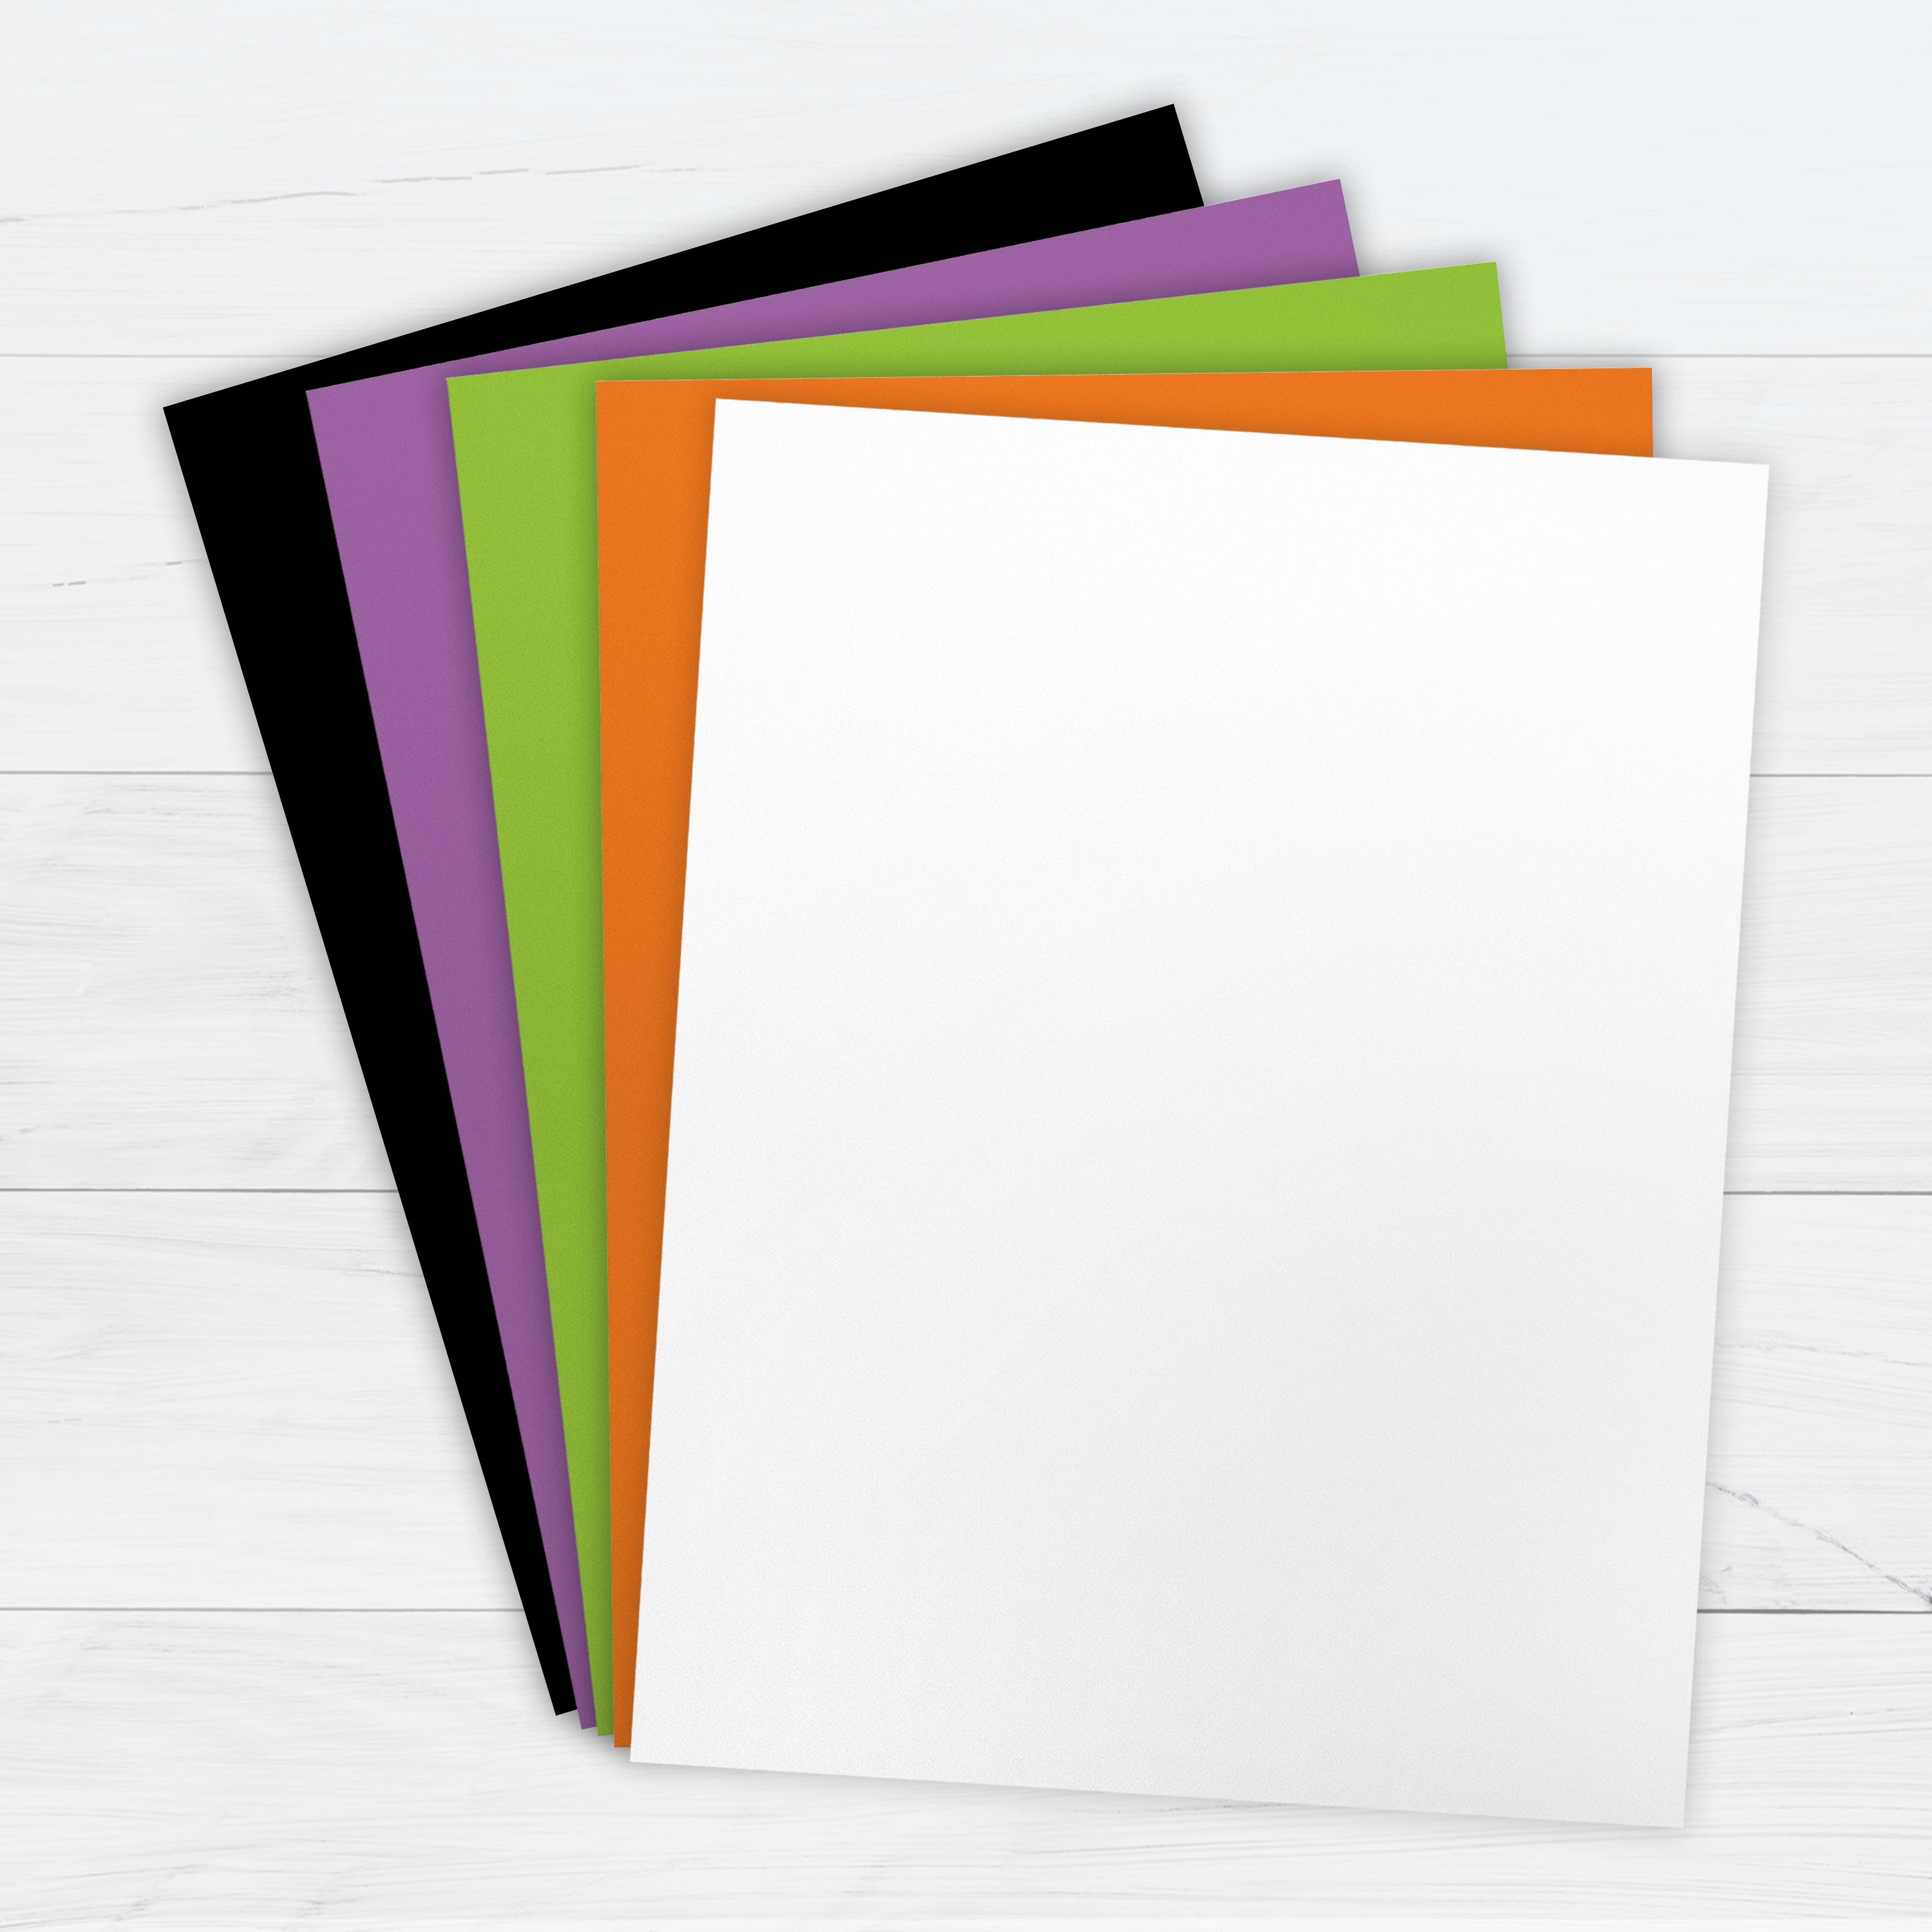 Printworks Neon Cardstock, 65 lb, 5 Assorted Florescent Colors, Perfect for  School and Craft Projects, 200 Sheets, 8.5” x 11” (00597)